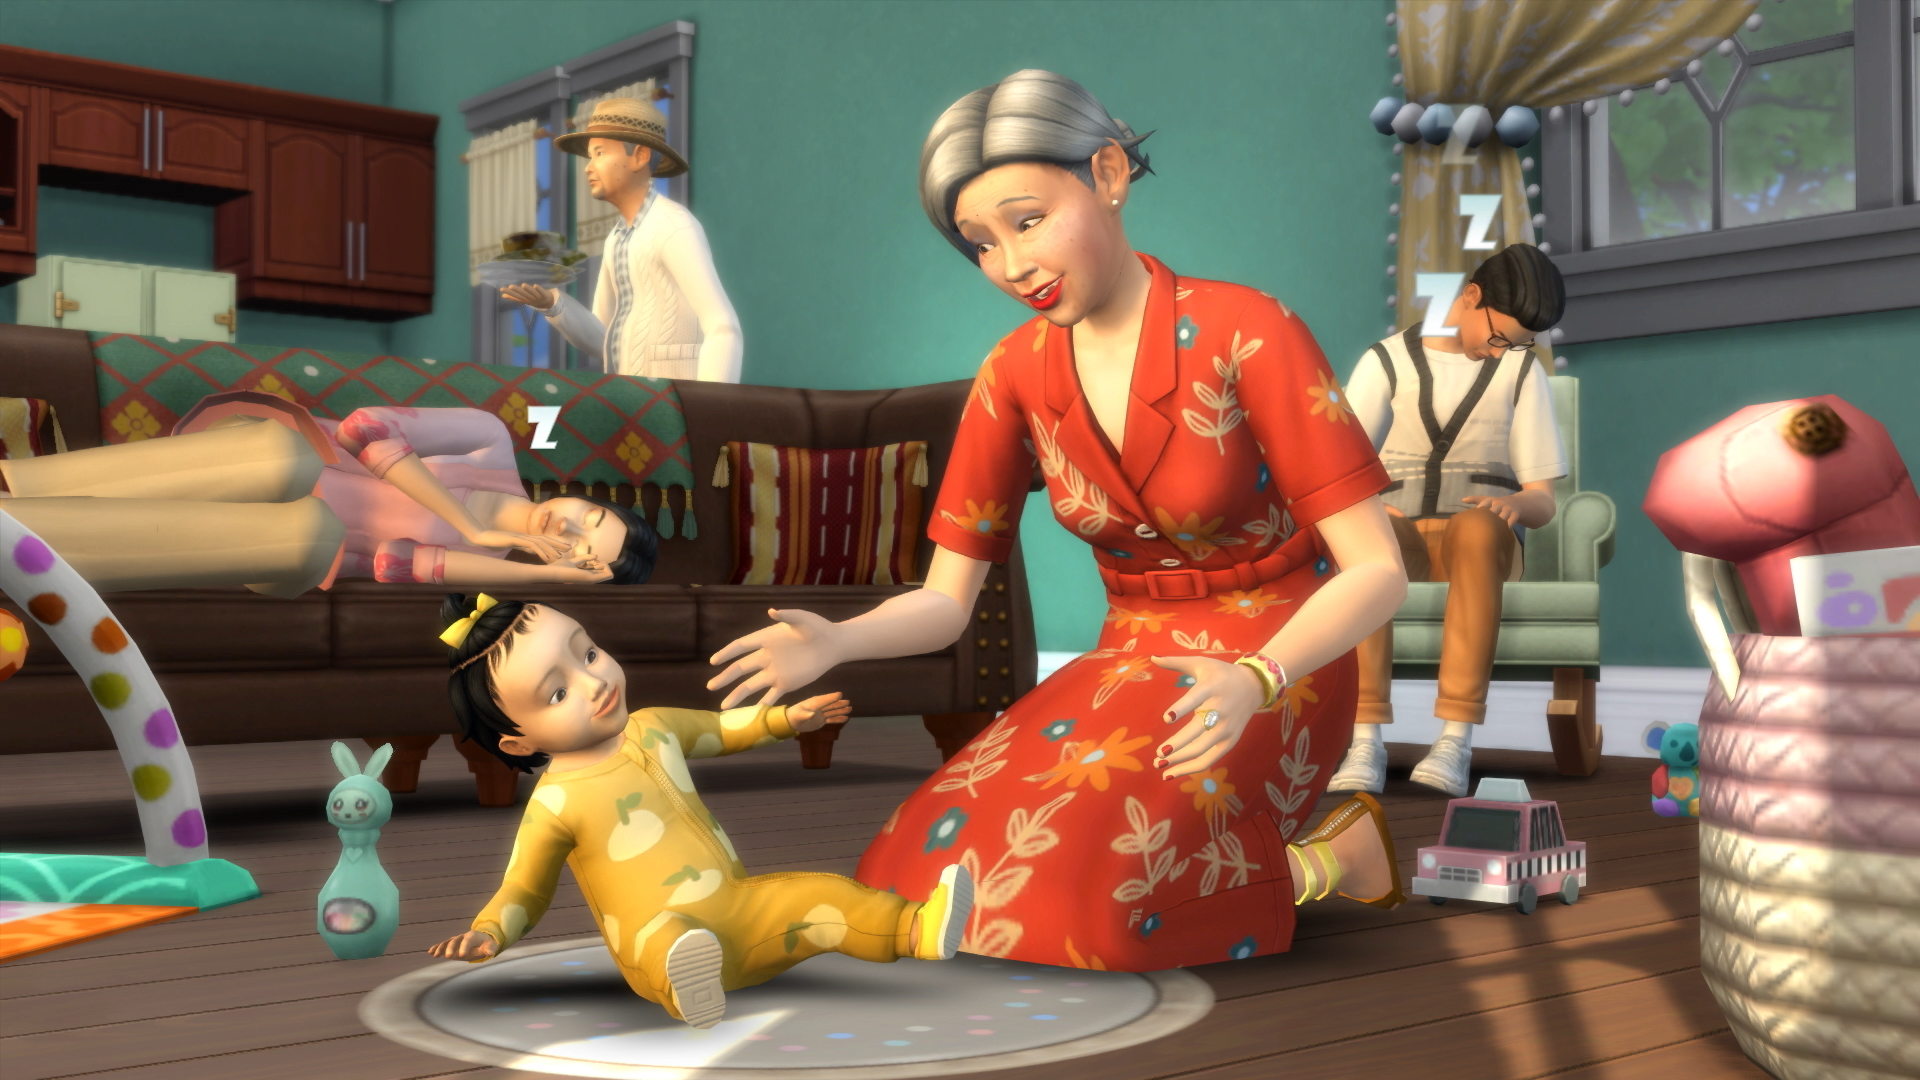 COMMUNITY BLOG: Family Matters in The Sims 4 Growing Together | SimsVIP